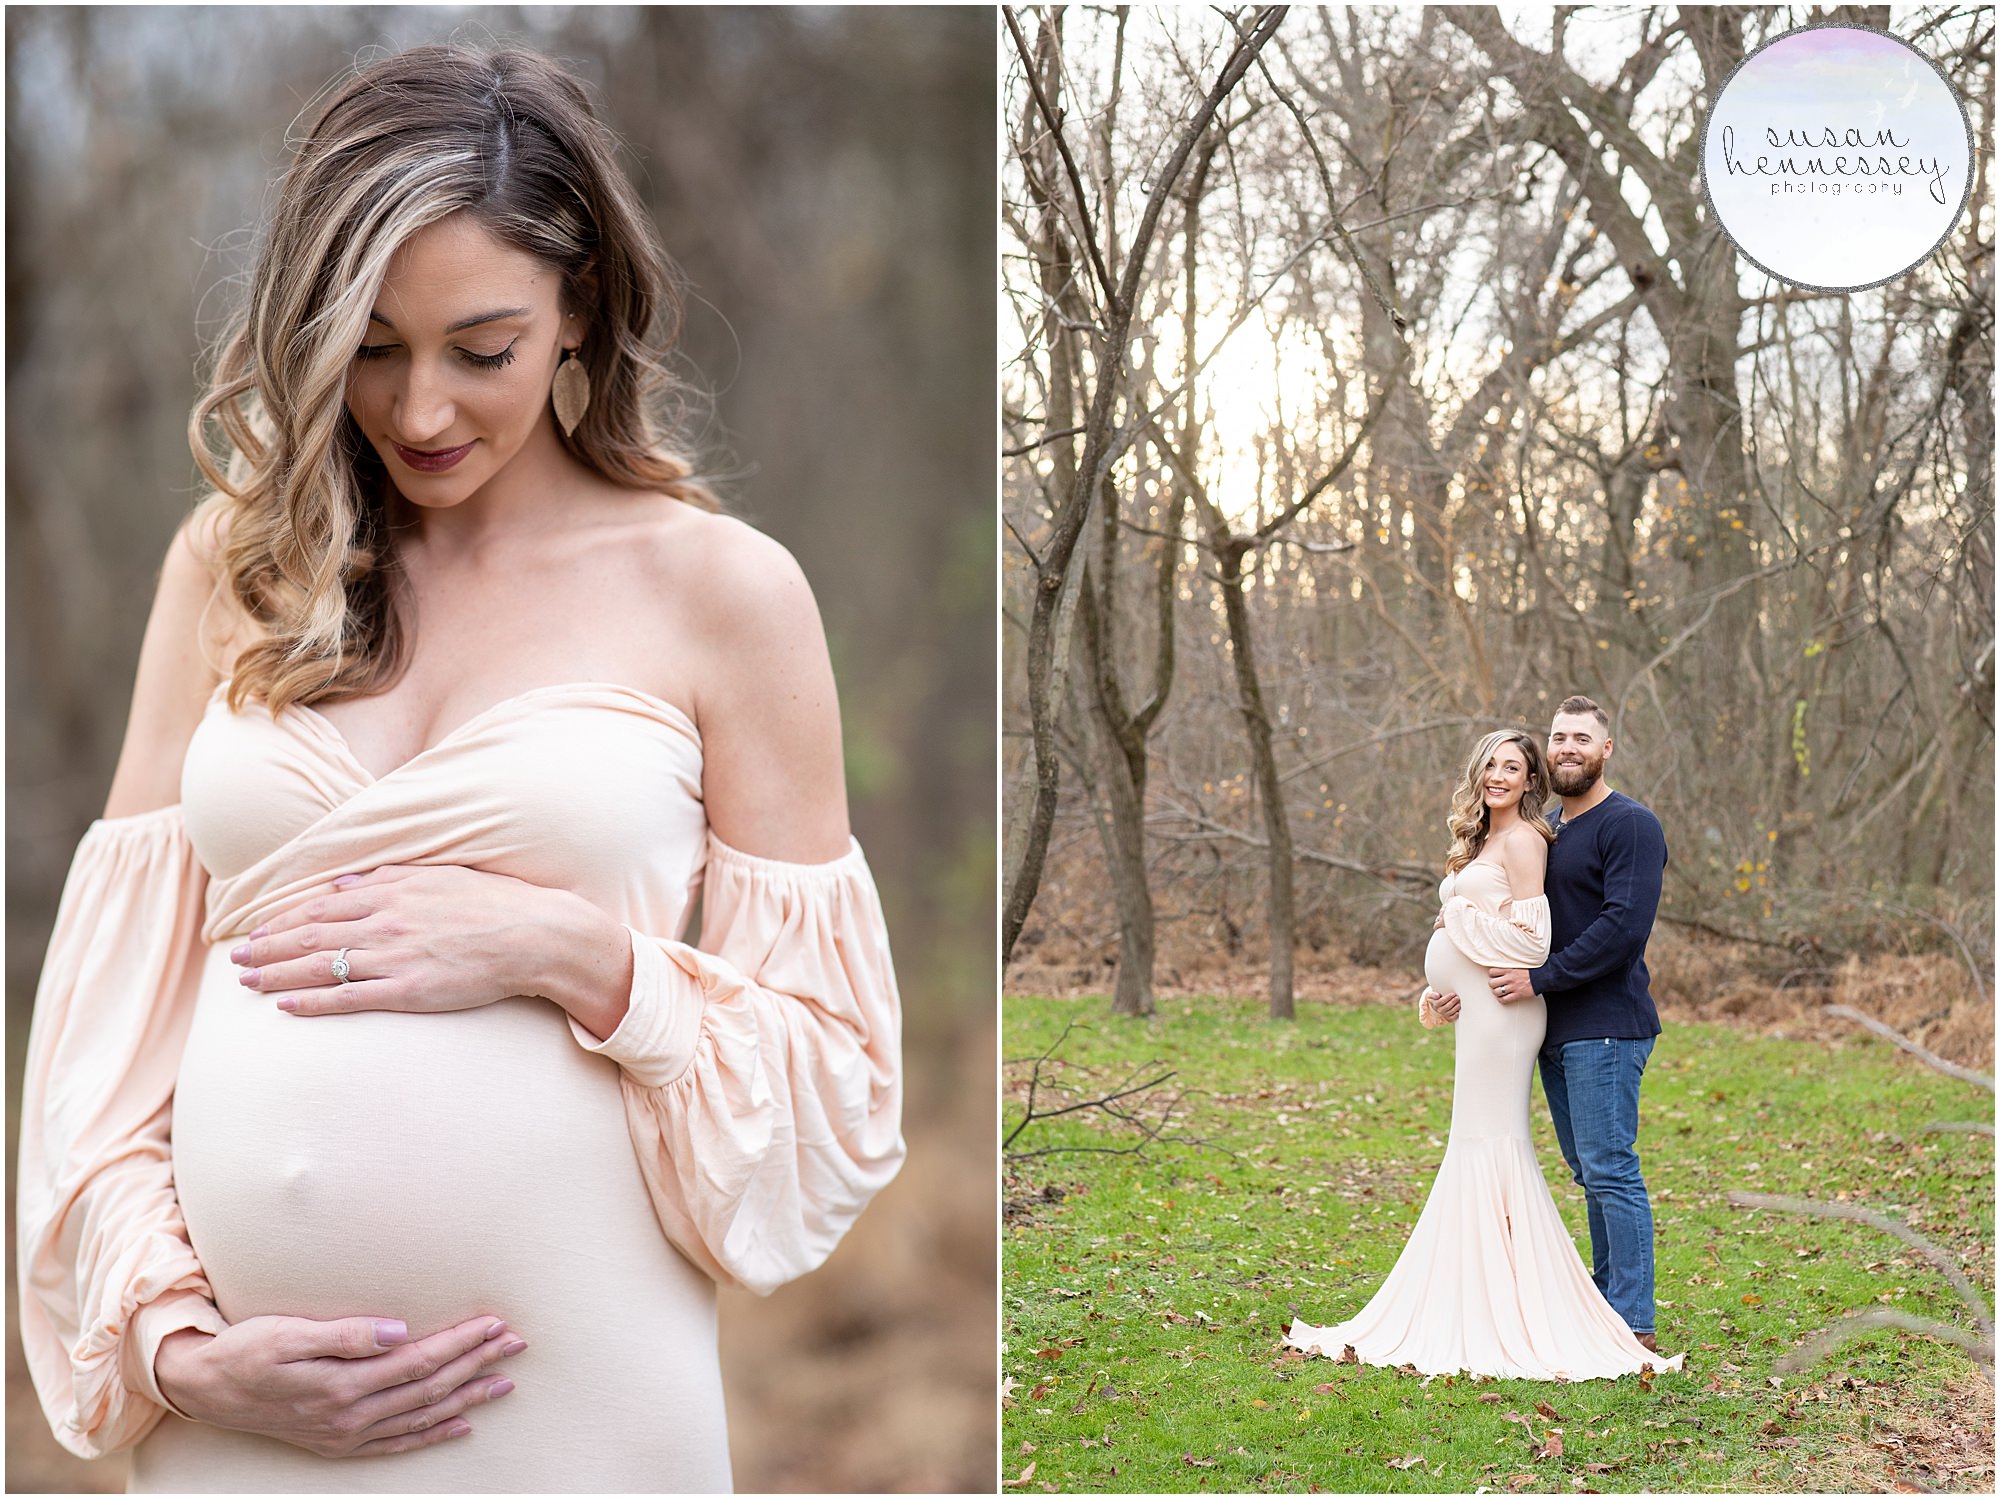 Susan Hennessey Photography is a South Jersey maternity and newborn photographer who offers a bump to baby collection for parents looking for a maternity and newborn session.